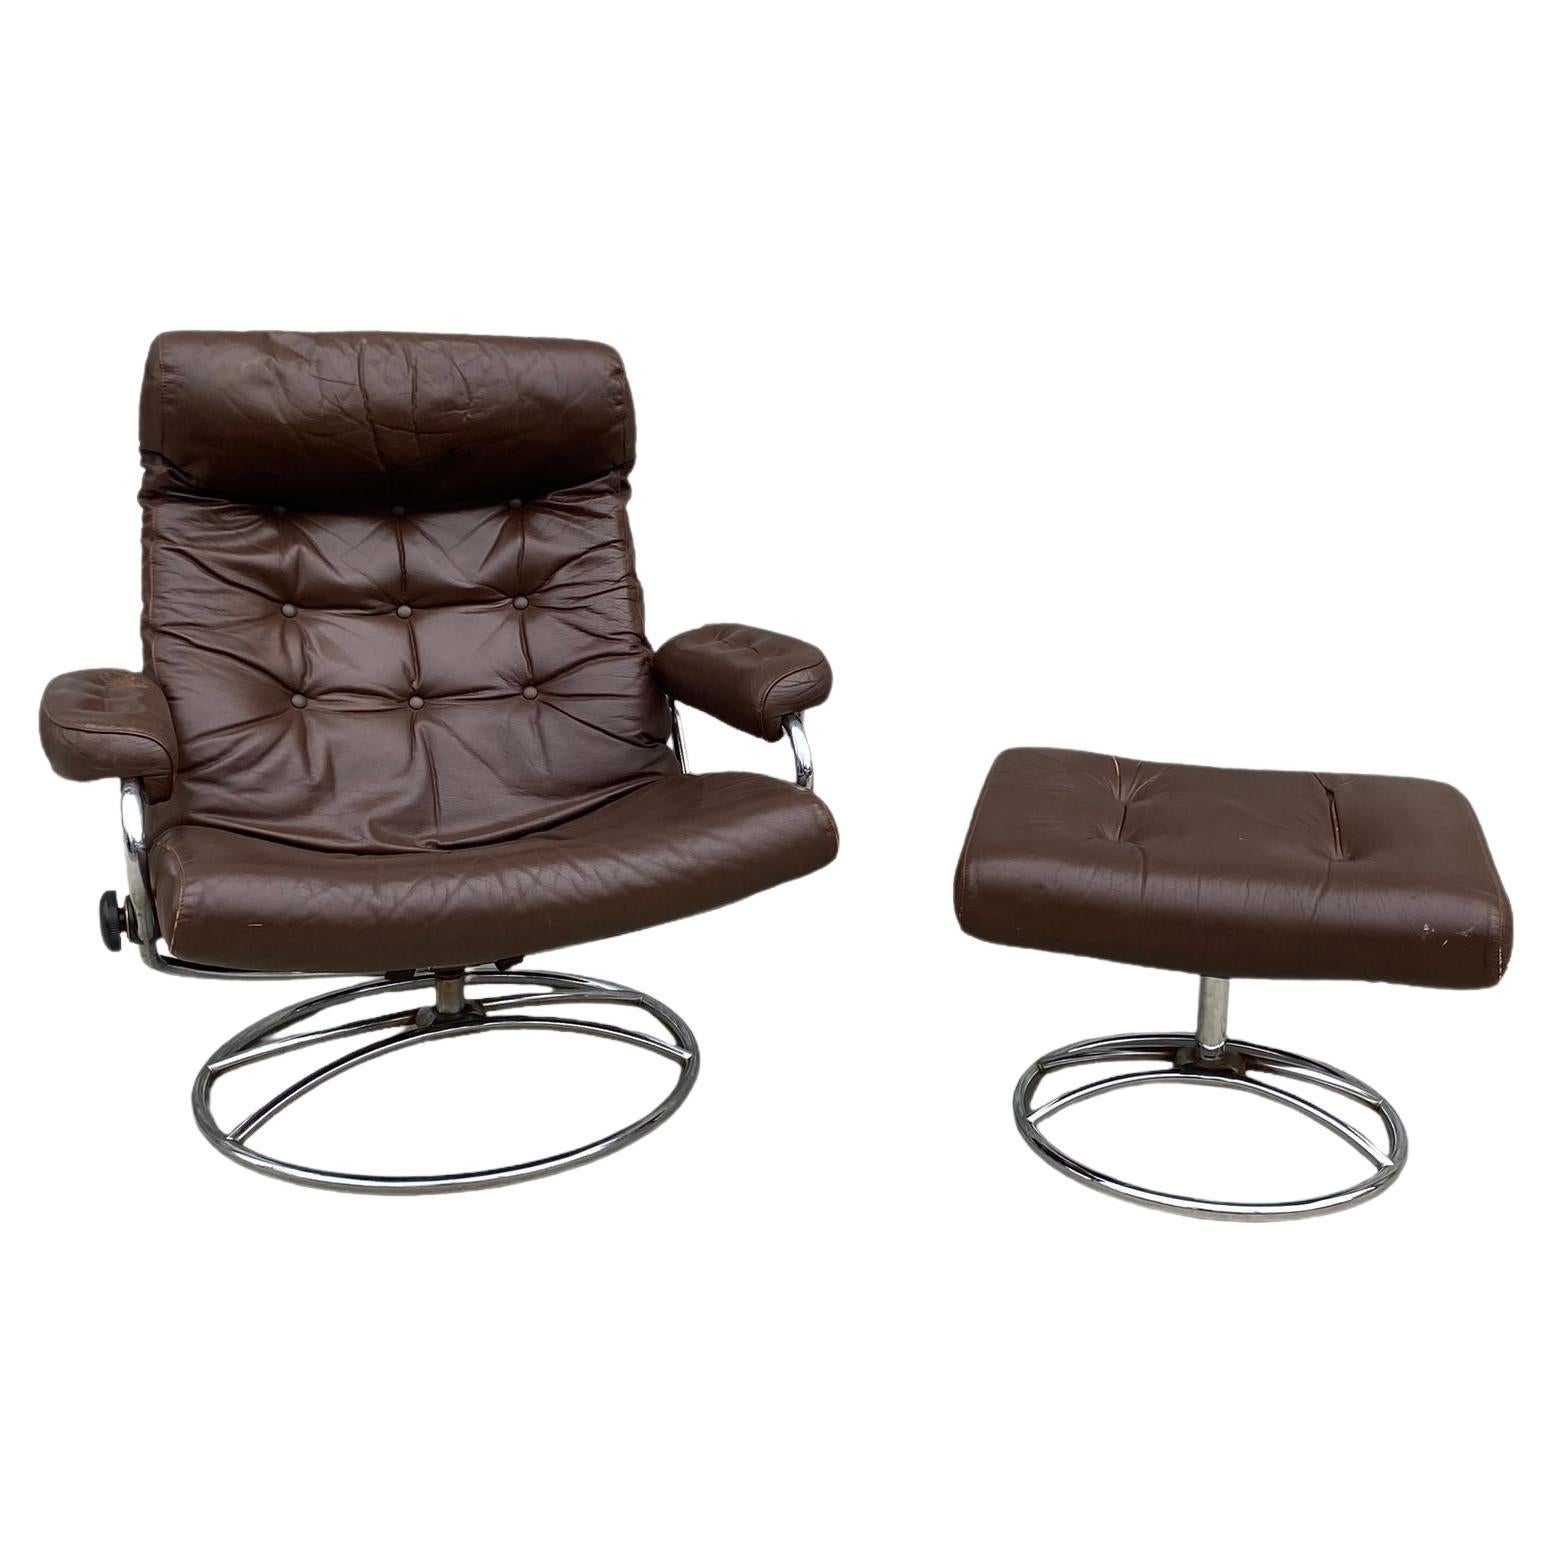 Ekornes Stressless Reclining Lounge Chair and Ottoman For Sale